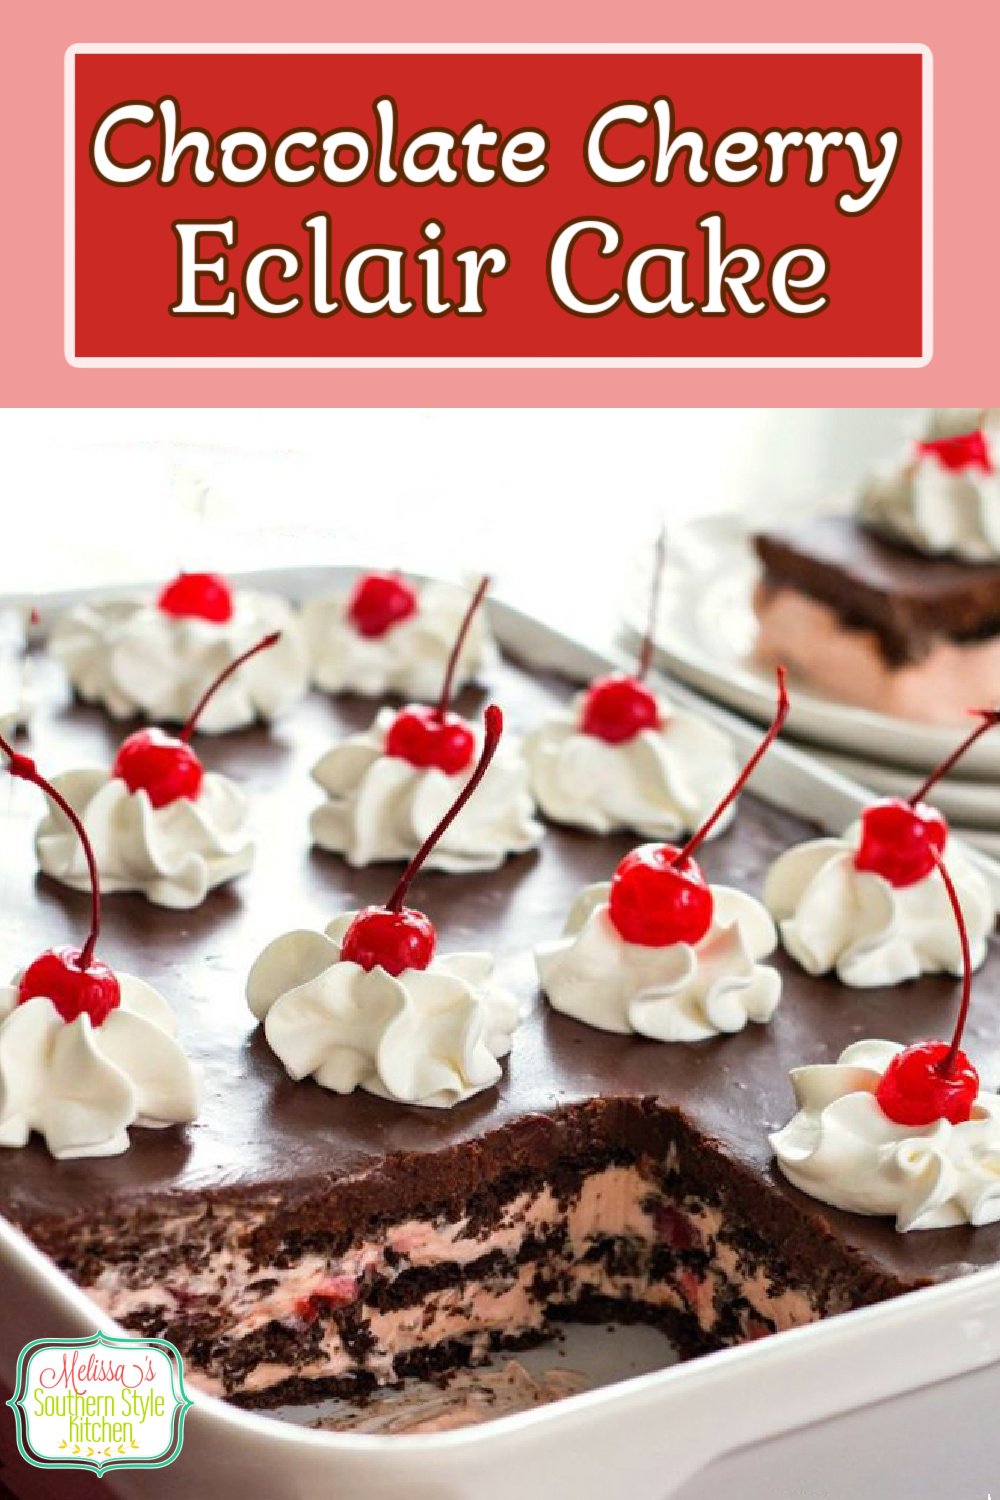 This insanely delicious Chocolate Cherry Eclair Cake will cure your sweets craving #eclaircake #chocolate #cerry #cherries #eclaircakerecipe #nobake #cakes #chocolatecake #desserts #southernrecipes